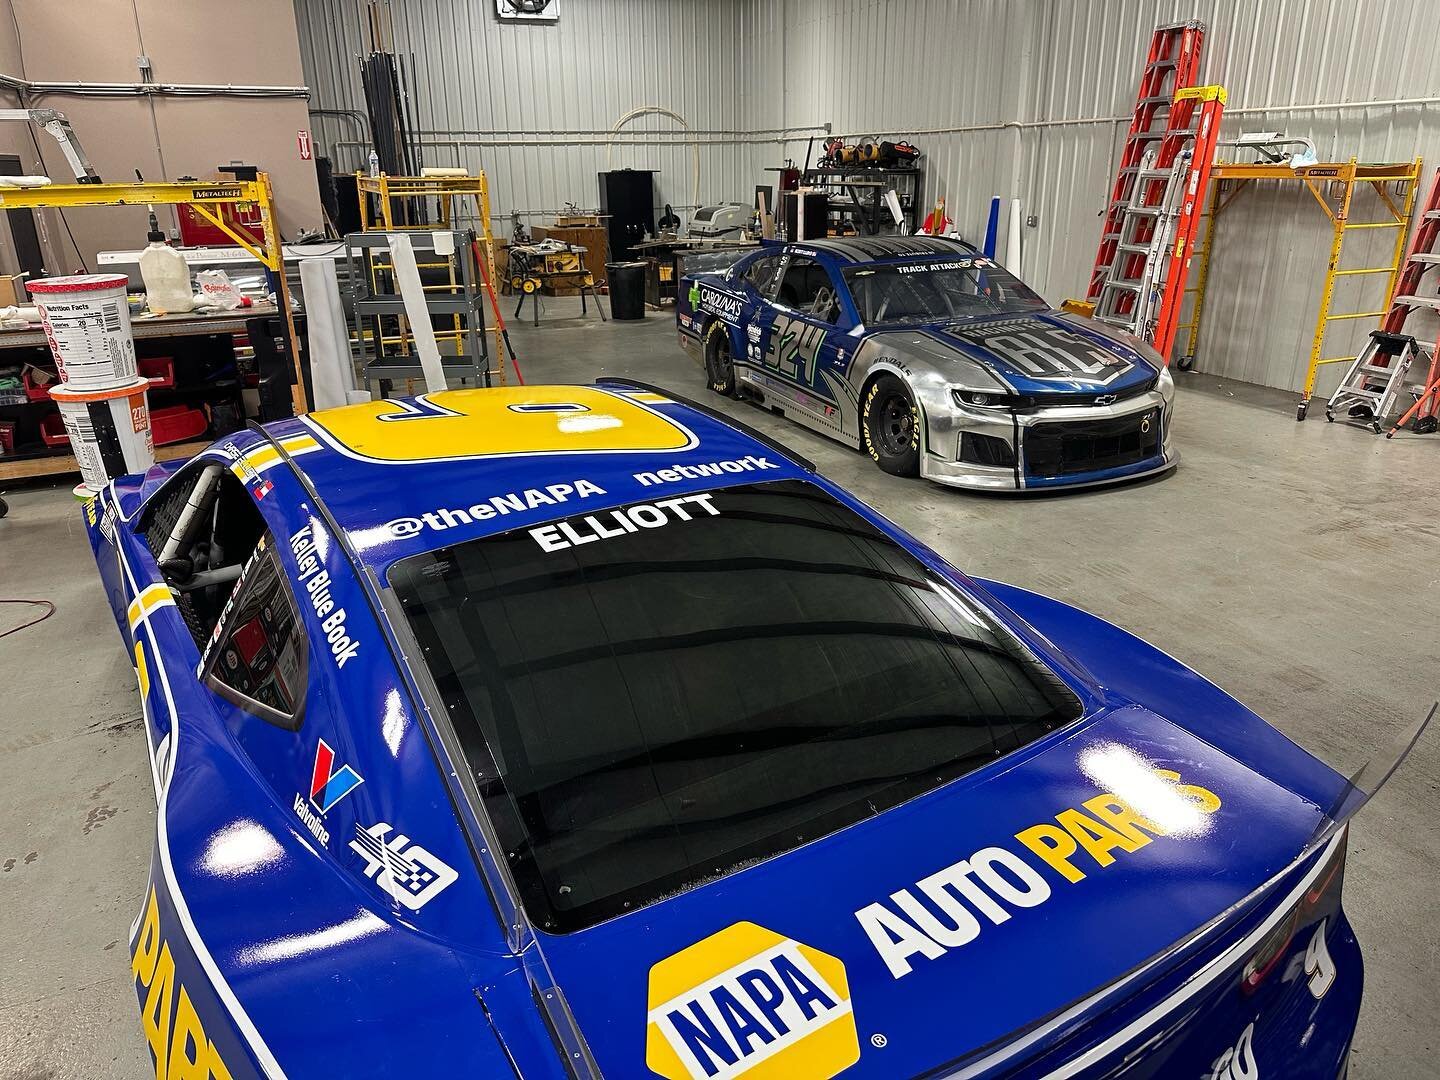 Thanks to our friends at @redeyedesigns305 , #dale will look very different very soon!! Looking forward to sharing our 2024 scheme with you soon! 
&hellip;
#endals #racing #stockcar #carwrap @teamhendrick @hendrickperformance